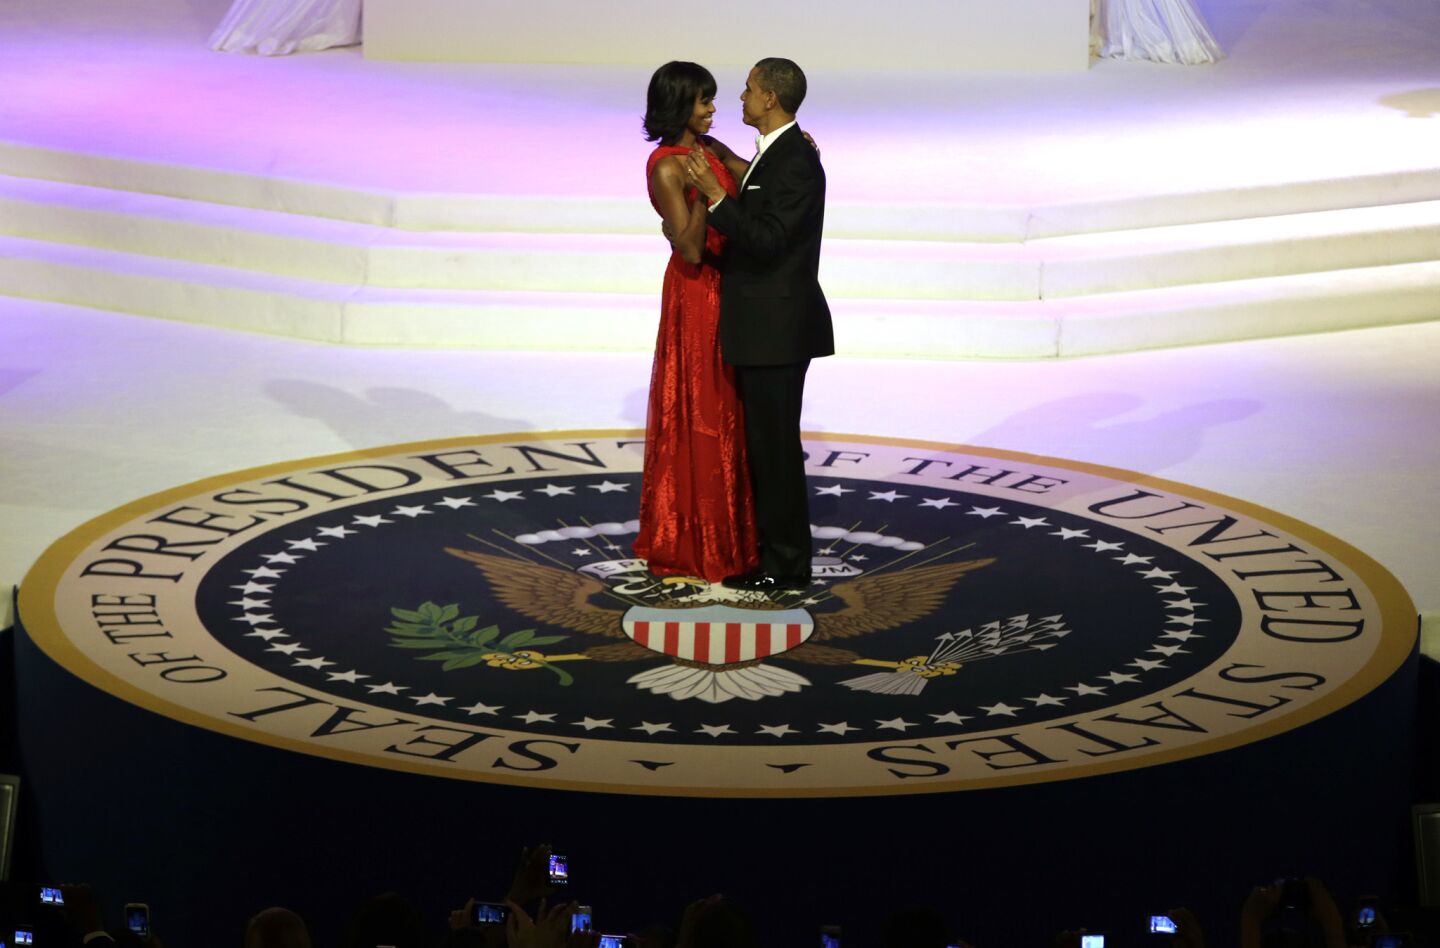 President Obama and First Lady Michelle Obama share a dance during the Commander-In-Chief Inaugural ball at the Washington Convention Center.